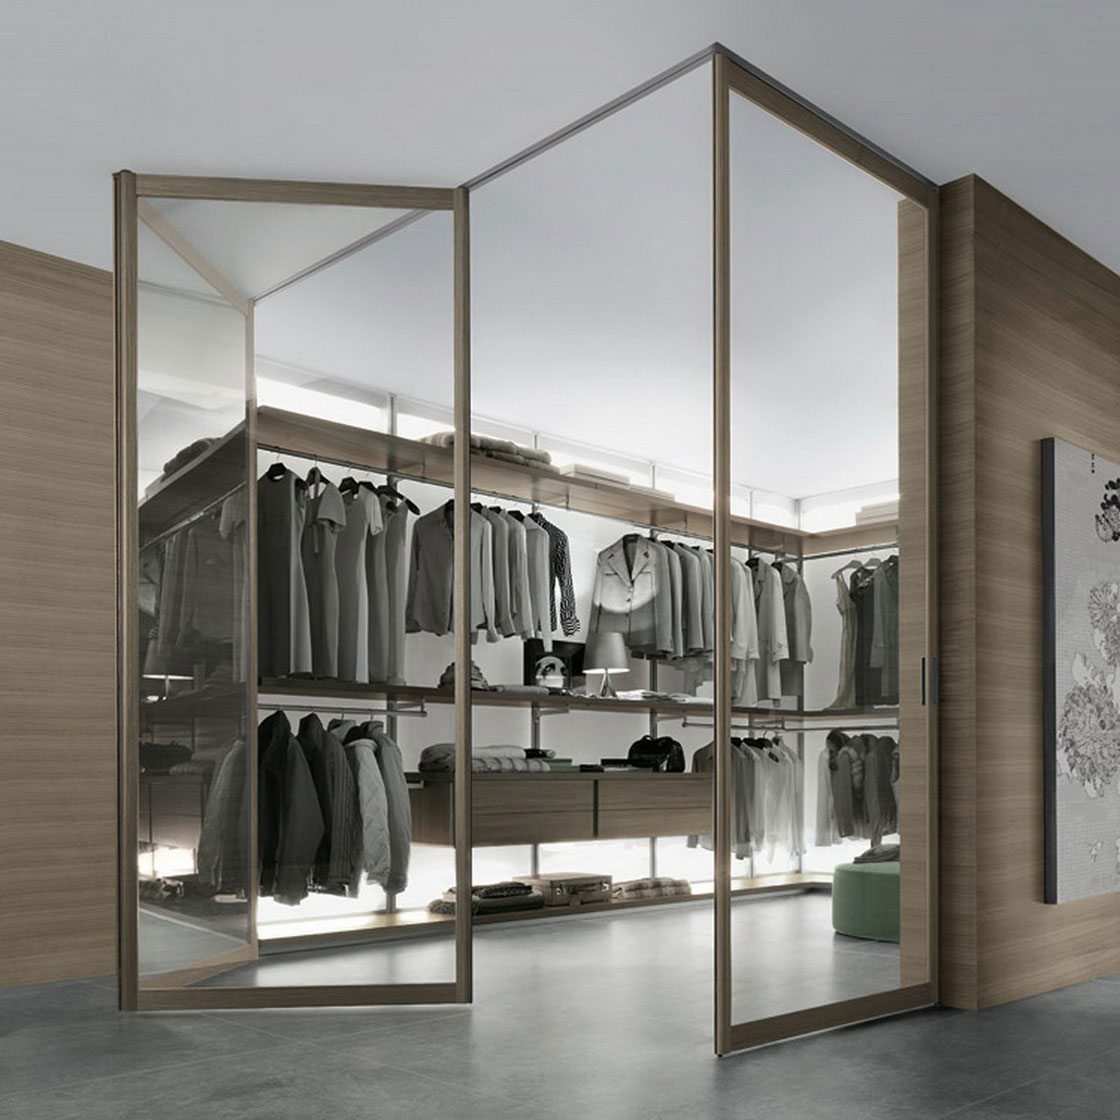 Minimalist Walk Ideas Captivating Minimalist Walk In Closet Ideas Applying Grey Flooring Tile With Clear Glass Folding Doors Completed With Cabinets And Clothes Rack Closet Walk In Closet Ideas: Enjoying Private Collection